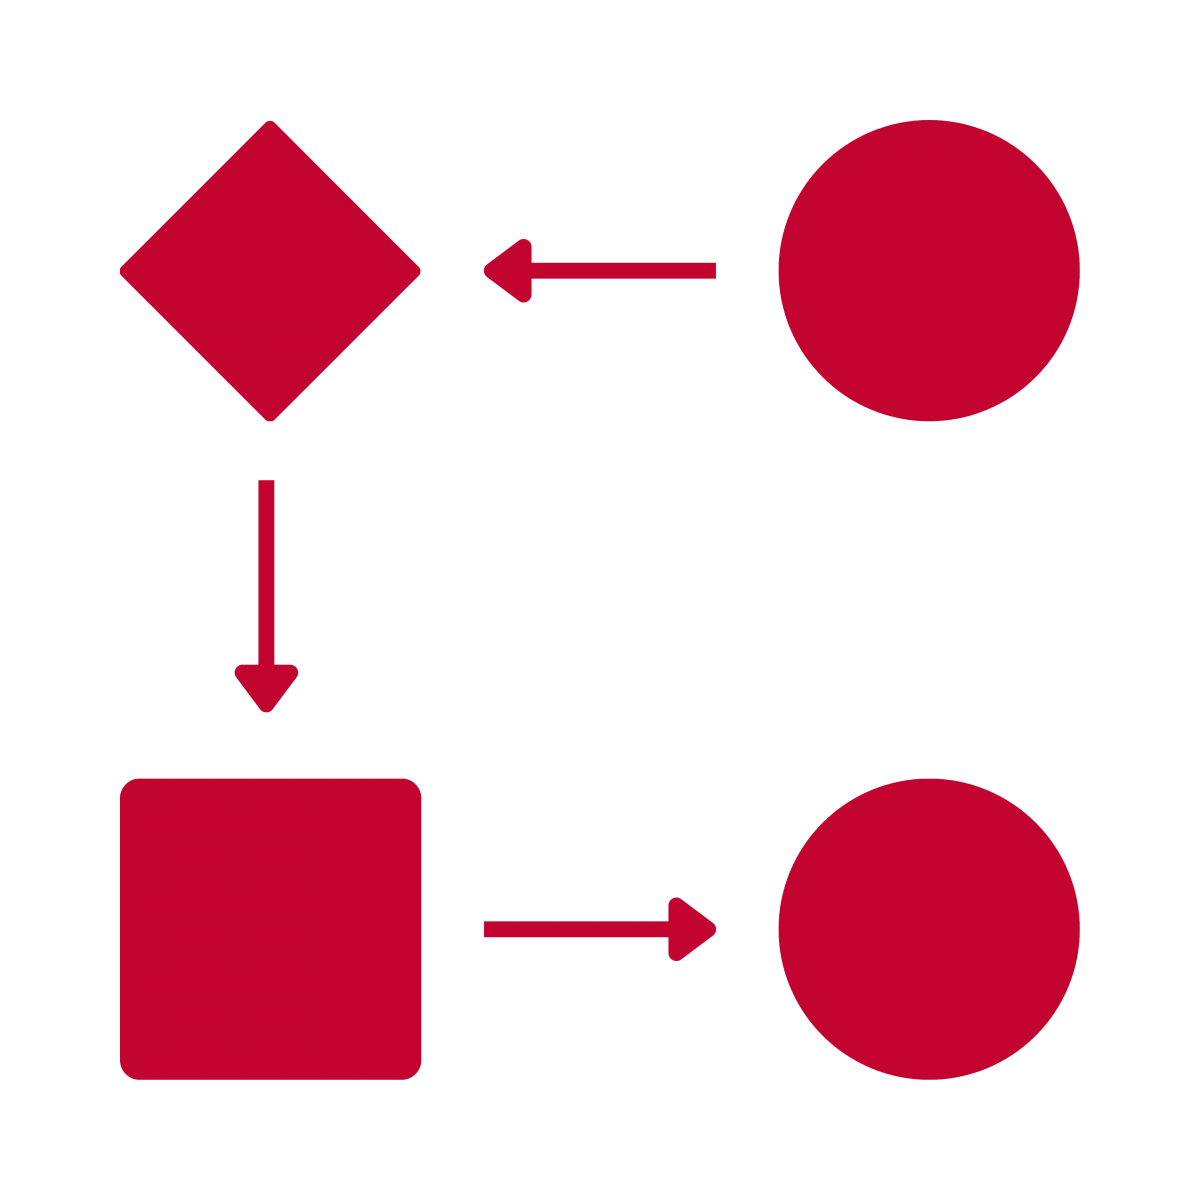 A red square with a red circle in the top right corner connecting to a red diamond in the left top corner by an arrow. The blue diamond is connecting to another red circle in the left bottom corner. The red circle in the left bottom corner is connecting to a red square in the right bottom corner. 